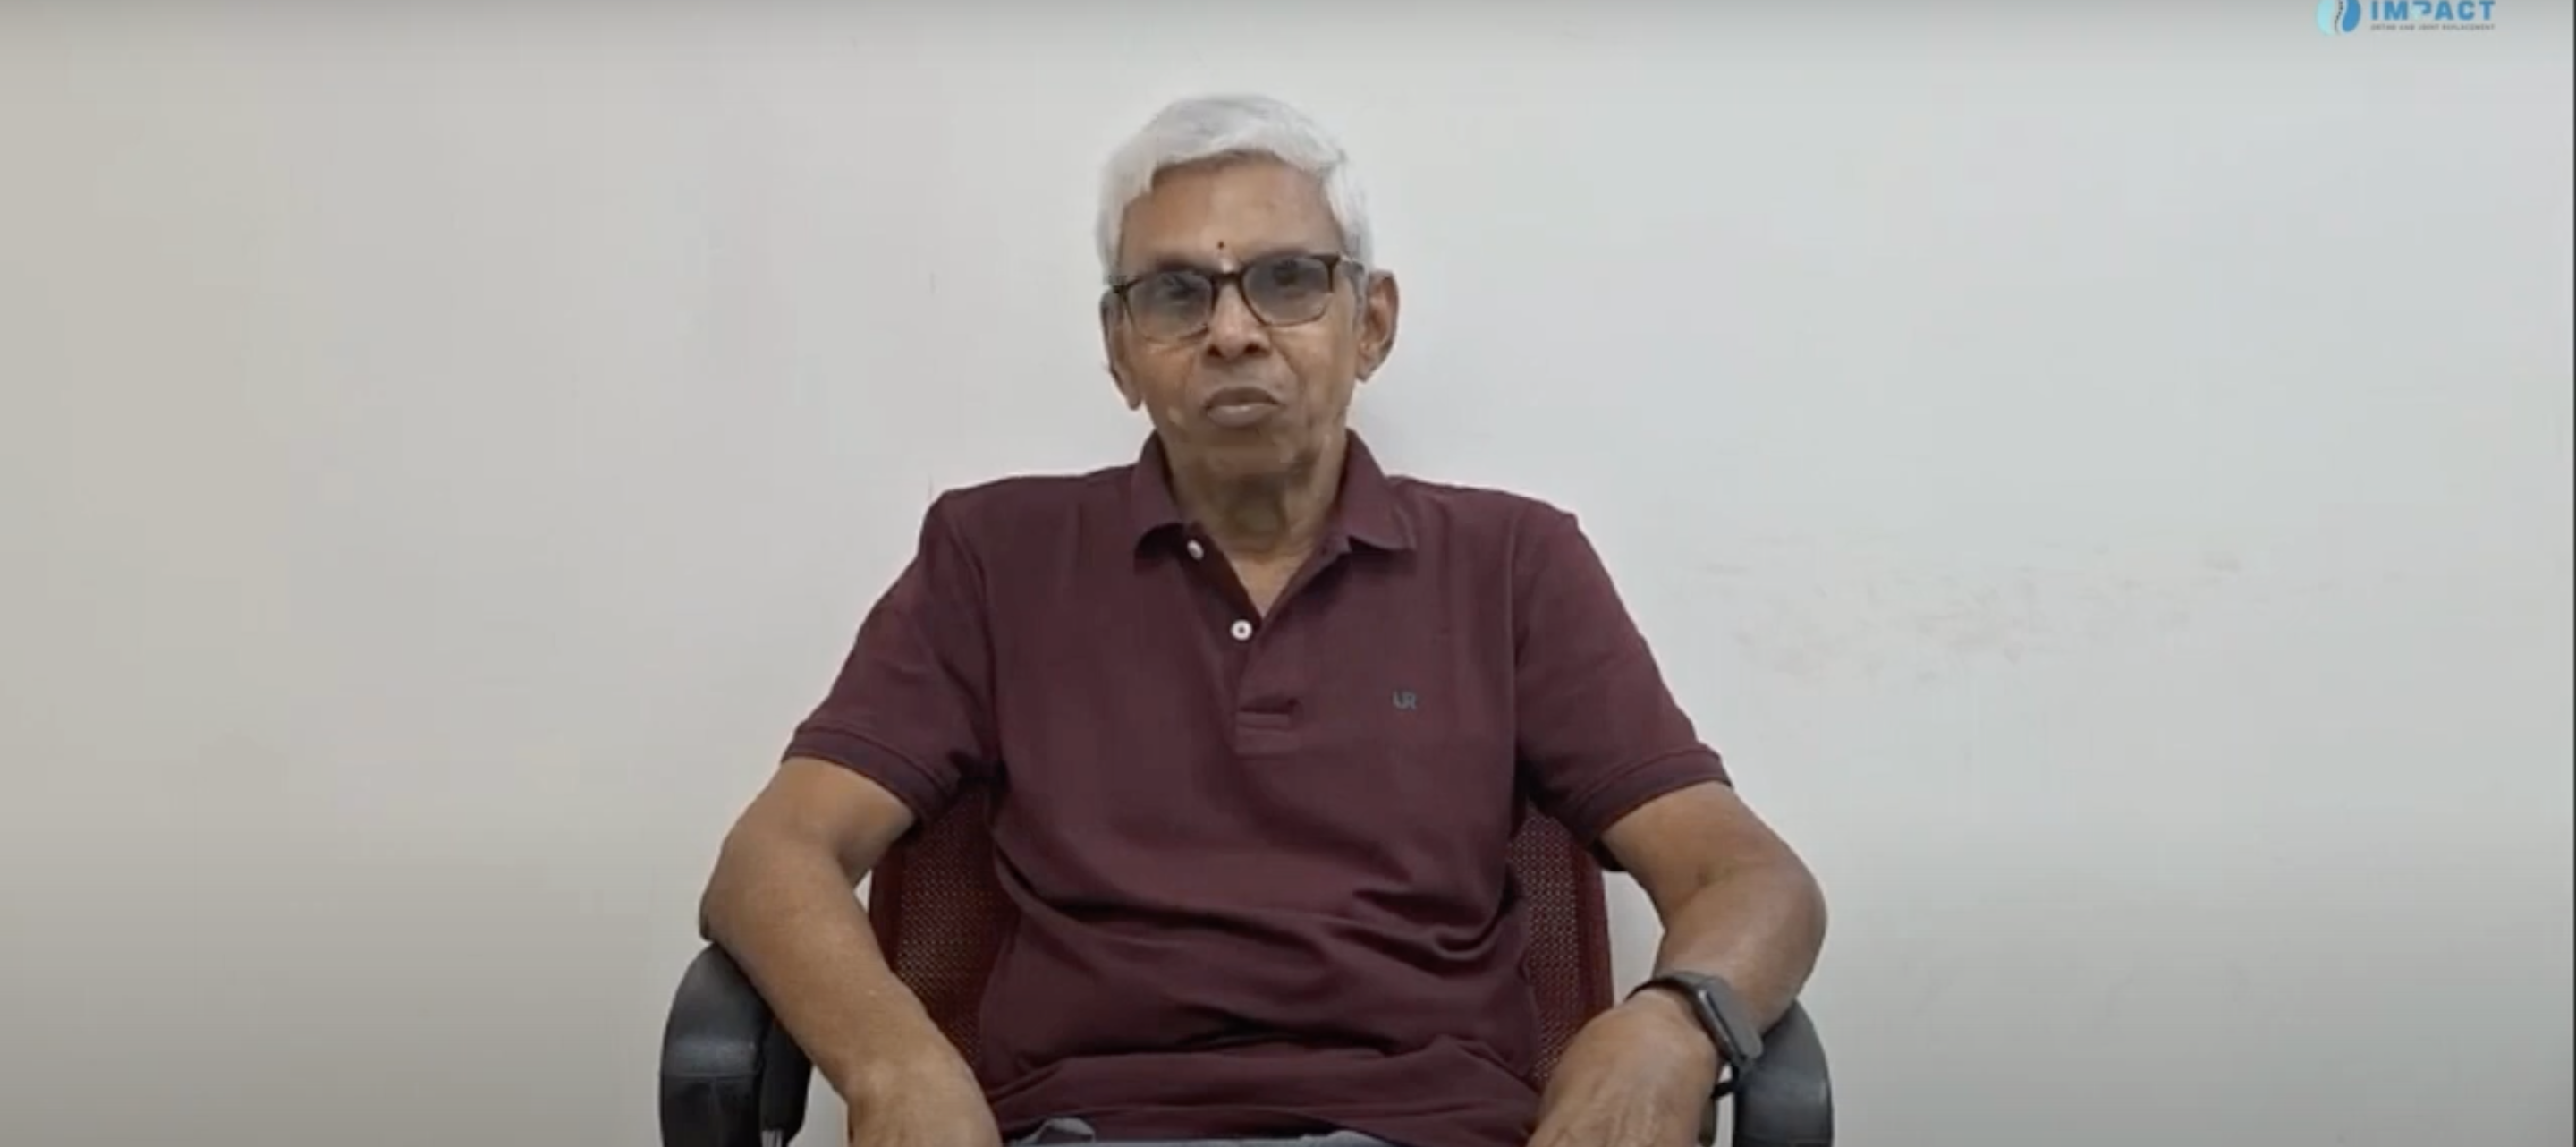 Total Knee Replacement Surgery, patient's Testimonial   Dr  Sharath Babu, Orthopedic Surgeon, Hyd